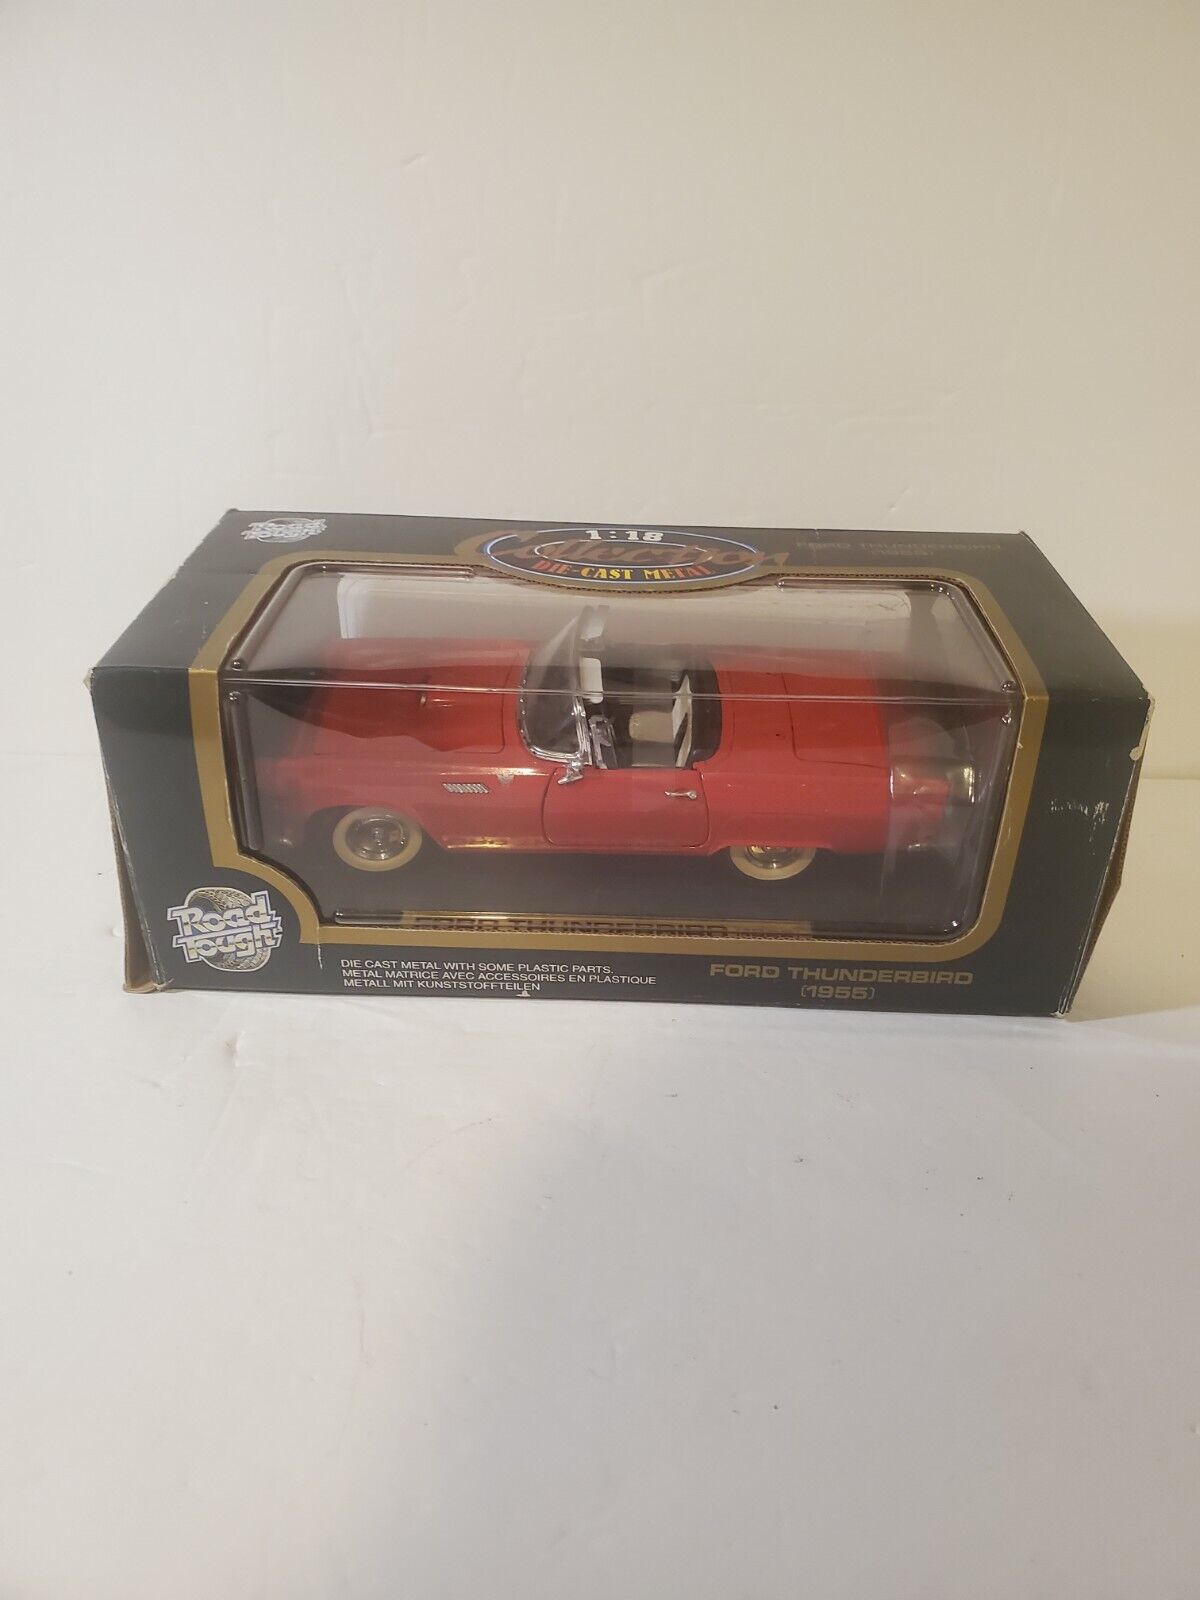 1955 FORD THUNDERBIRD ROAD LEGENDS 1:18 SCALE DIE CAST